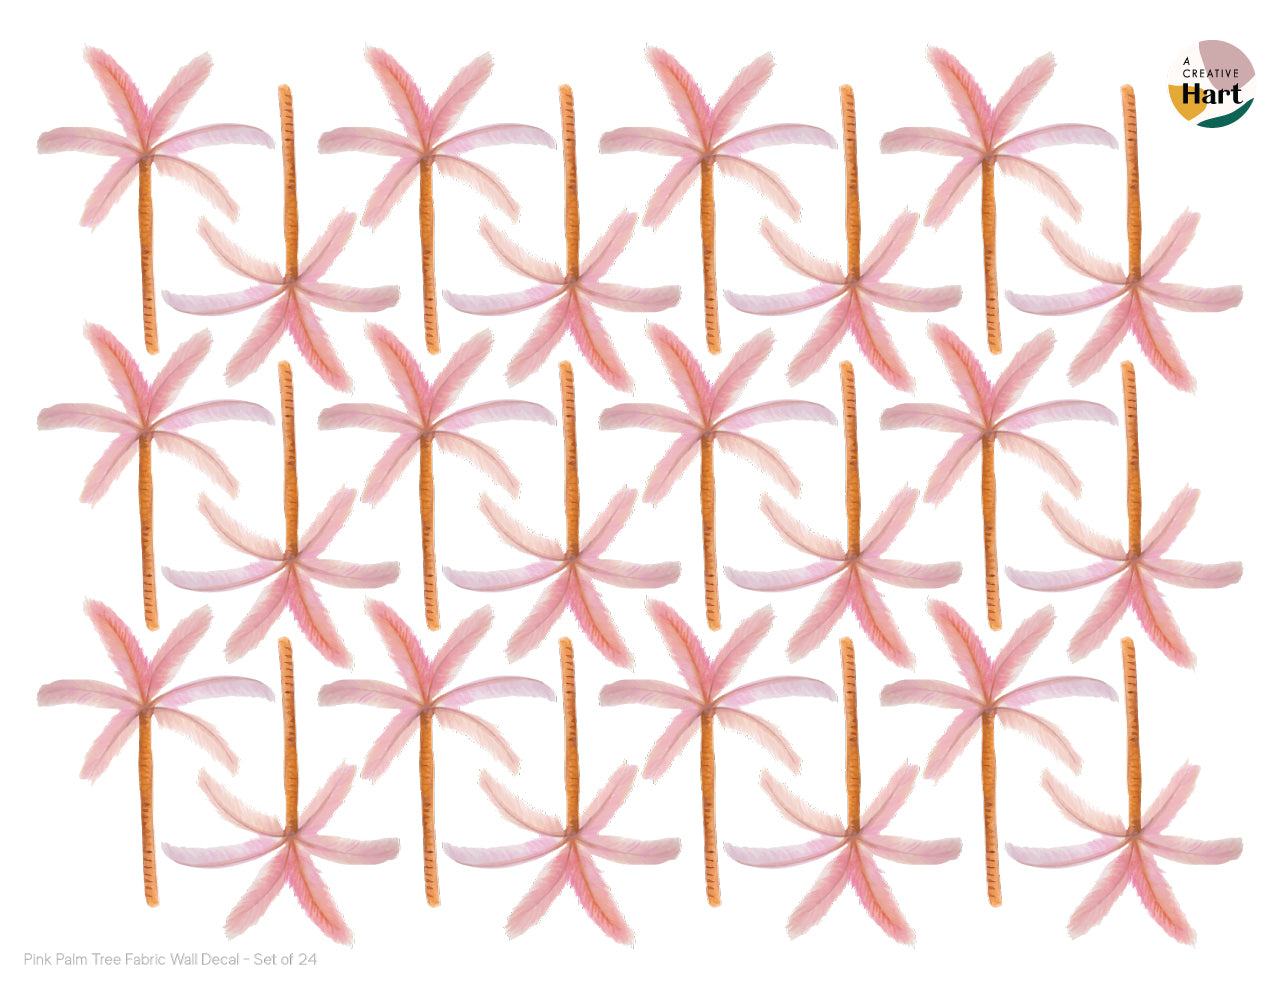 Pink Palm Tree Fabric Wall Decals - A Creative Hart